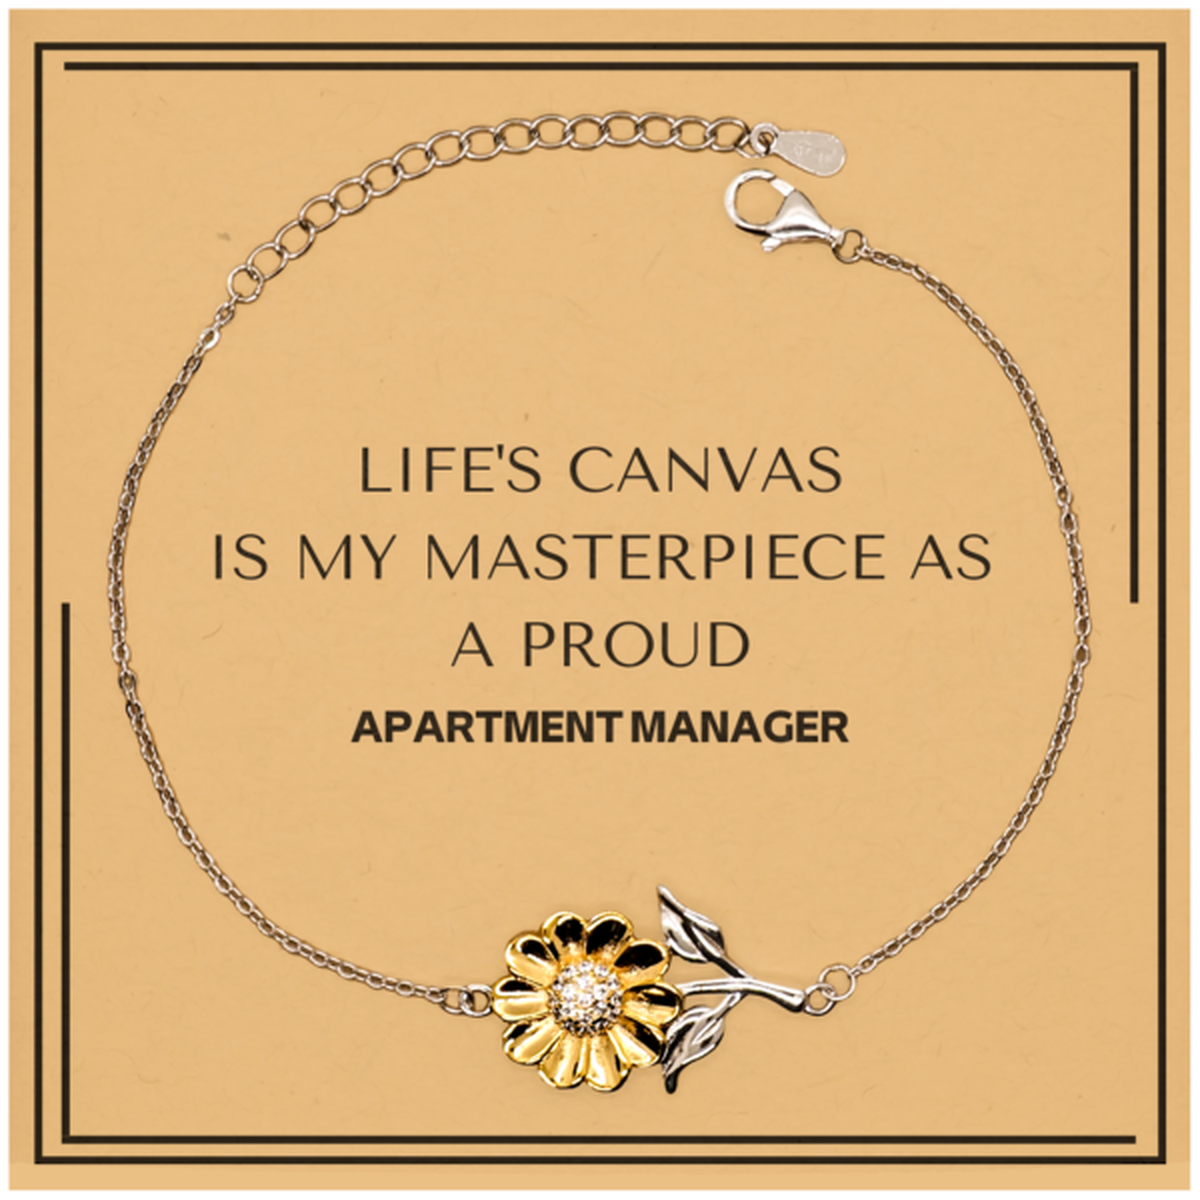 Proud Apartment Manager Gifts, Life's canvas is my masterpiece, Epic Birthday Christmas Unique Sunflower Bracelet For Apartment Manager, Coworkers, Men, Women, Friends